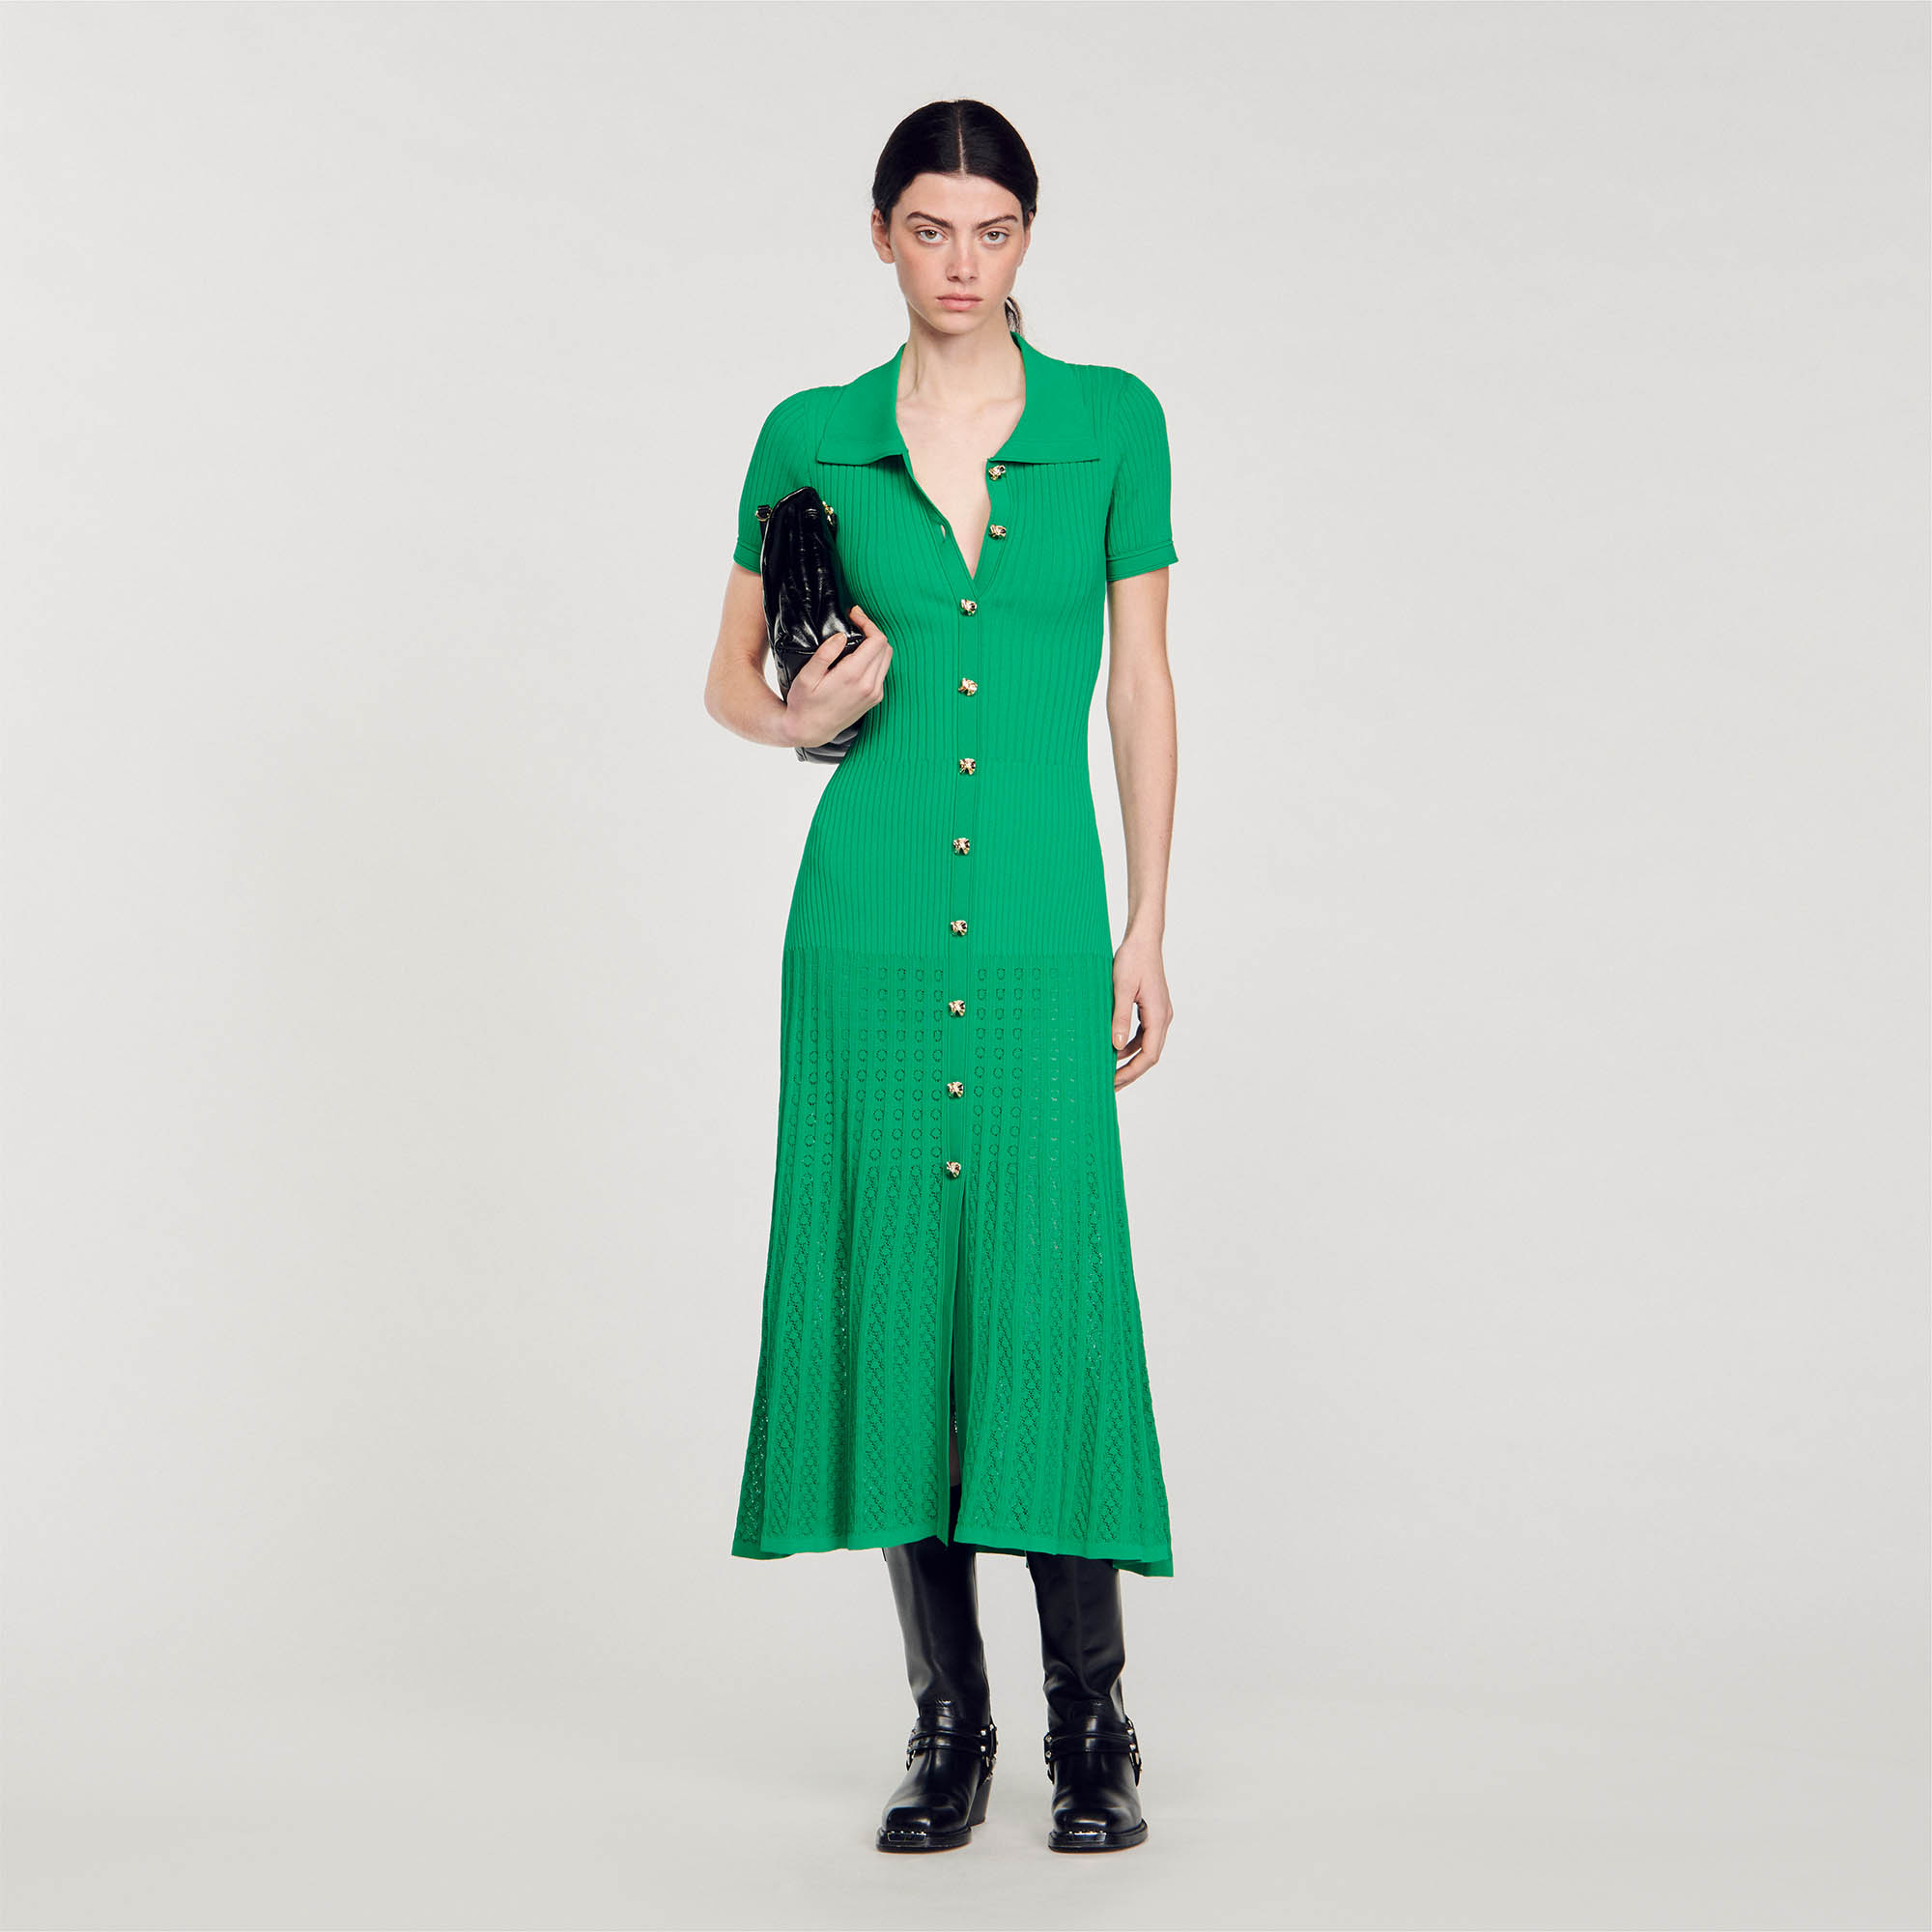 Sandro viscose Rib knit maxi dress, with slit and flared at the bottom, with a square lapel collar, short sleeves and a button fastening with decorative buttons